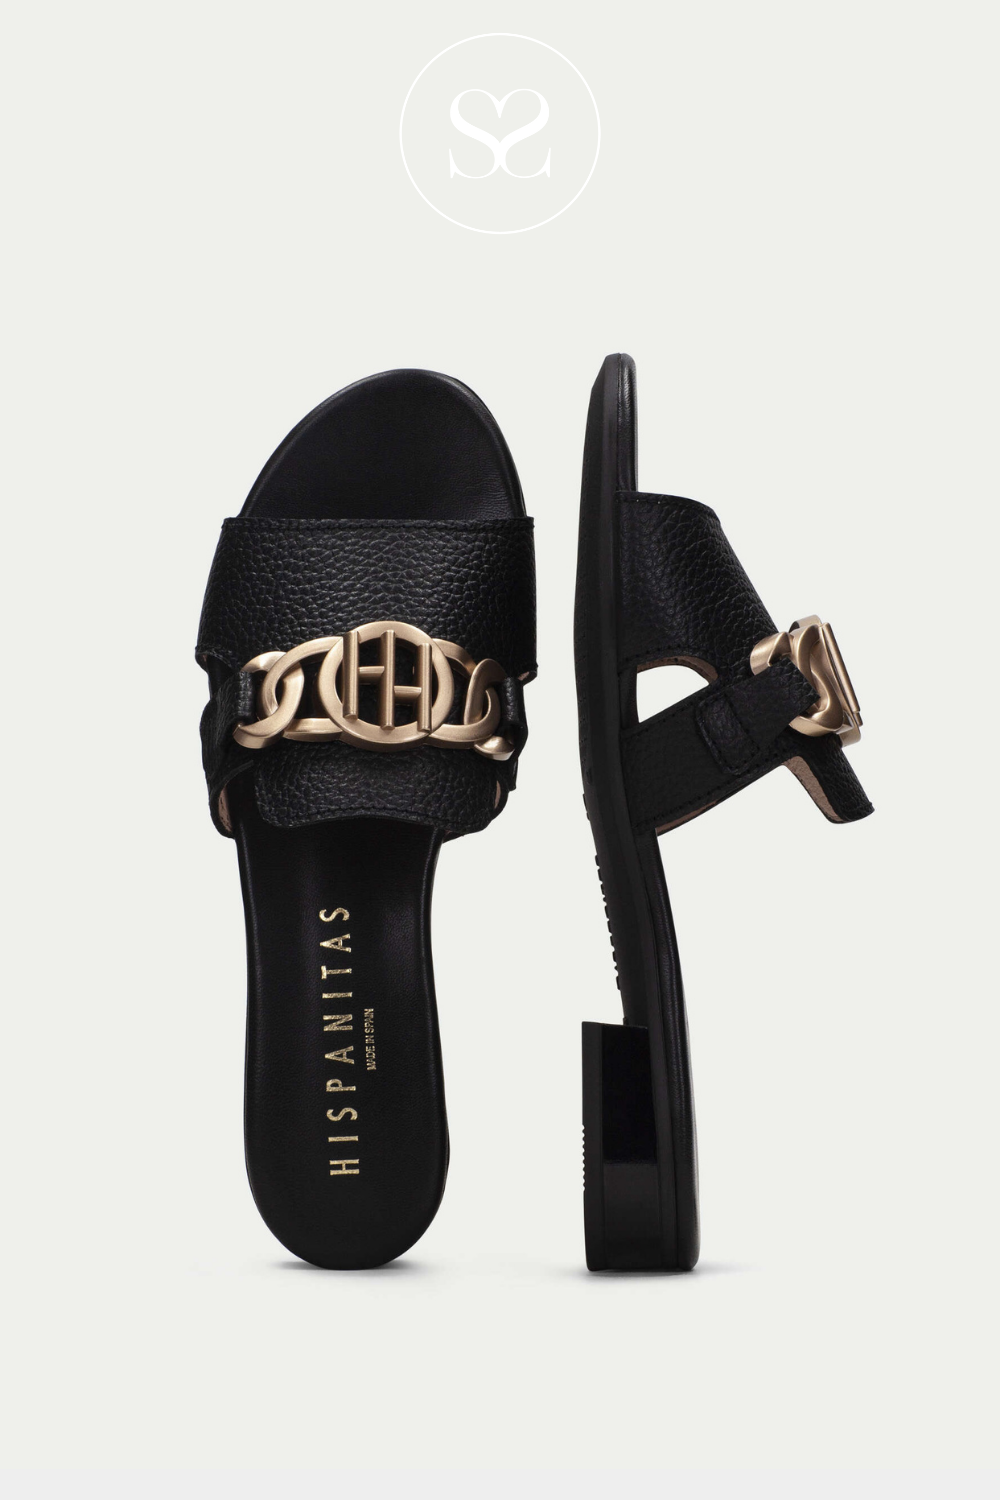 HISPANITAS HV243268 BLACK LEATHER SLIDER SANDALS WITH LOW HEEL AND GOLD CHAIN BUCKLE FEATURE